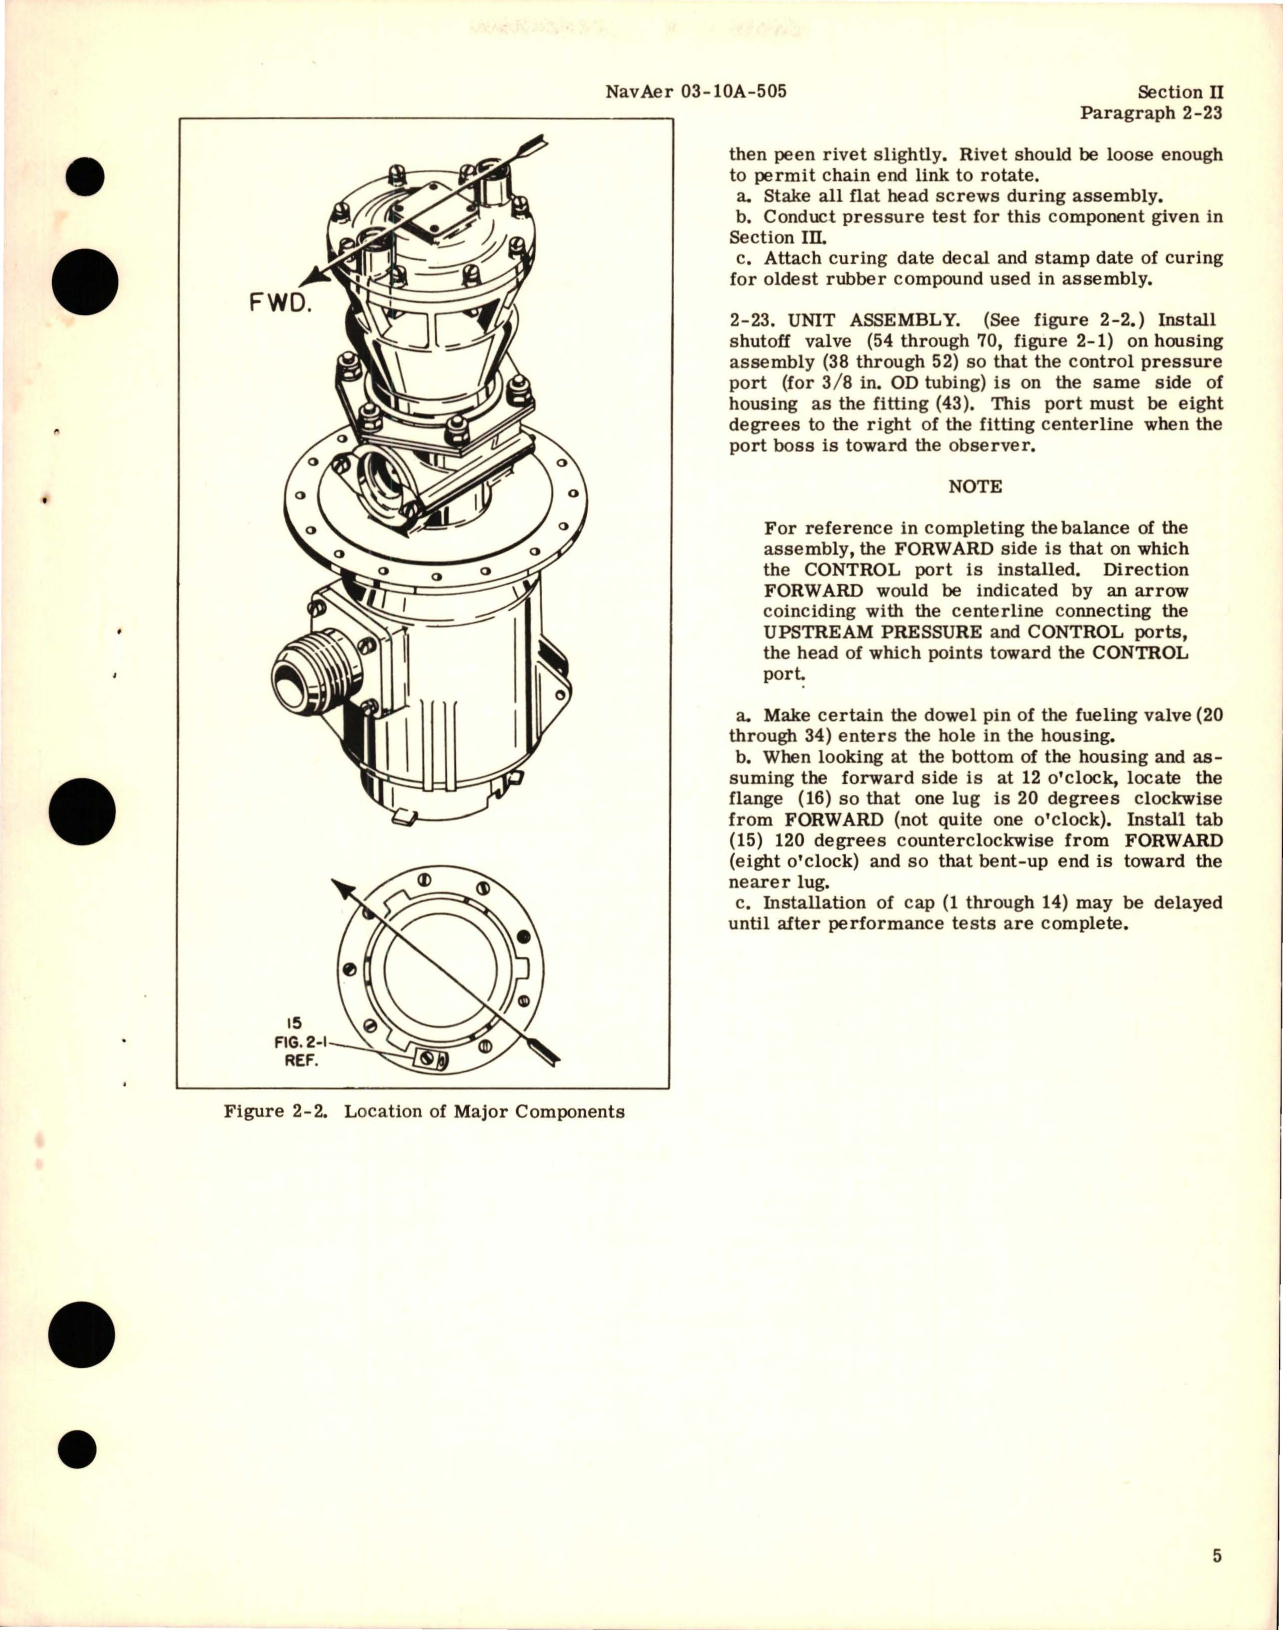 Sample page 7 from AirCorps Library document: Overhaul Instructions for Fueling and Defueling Unit Assembly - Parts 42-1137-000 and 42-1137-001